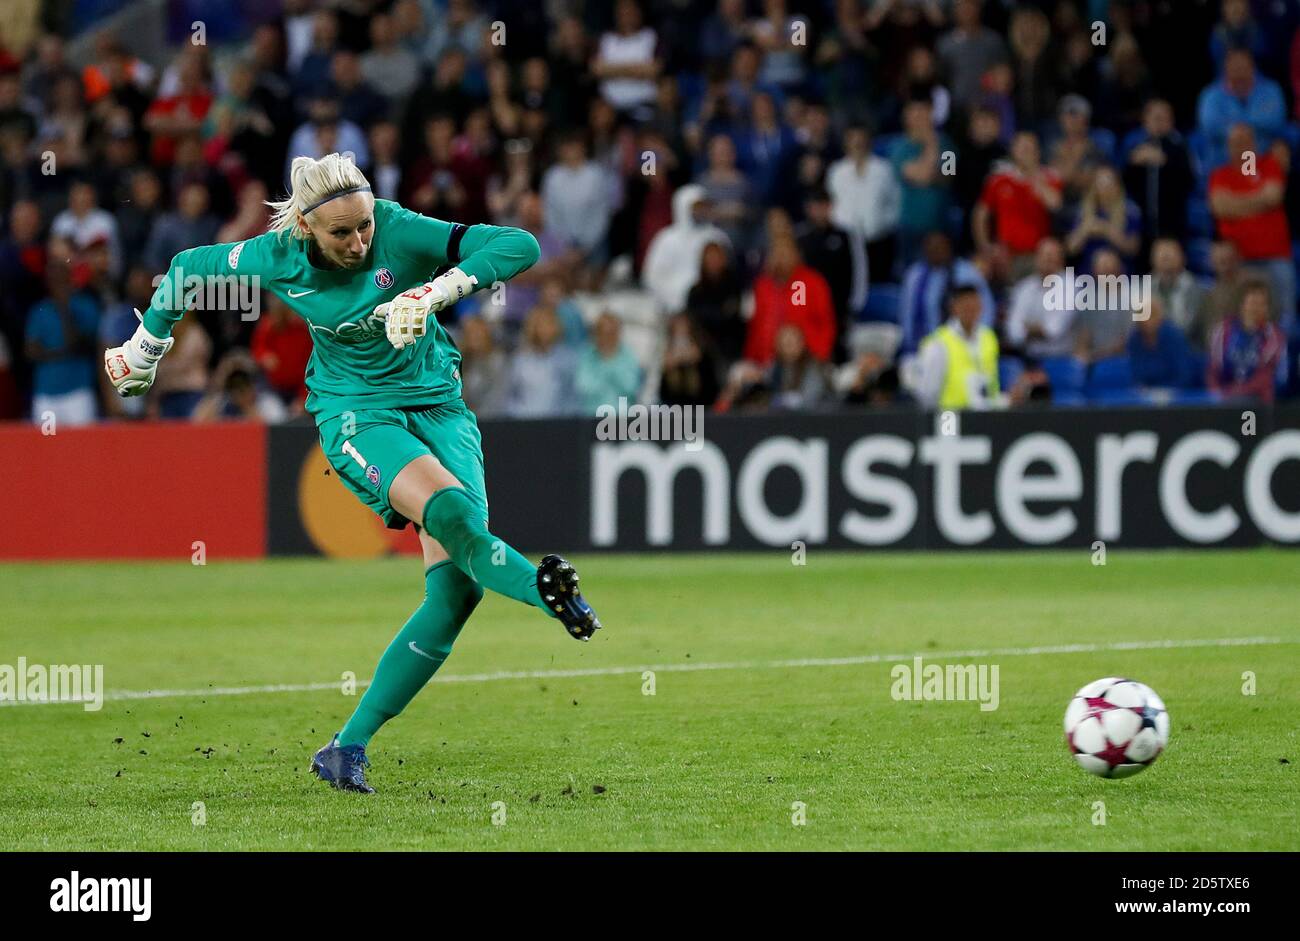 Paris Saint-Germain goalkeeper Katarzyna Kiedrzynek shoots and misses her penalty in the shoot-out following the UEFA Women's Champions League Final held at the Cardiff City Stadium, 1st June 2017 Stock Photo